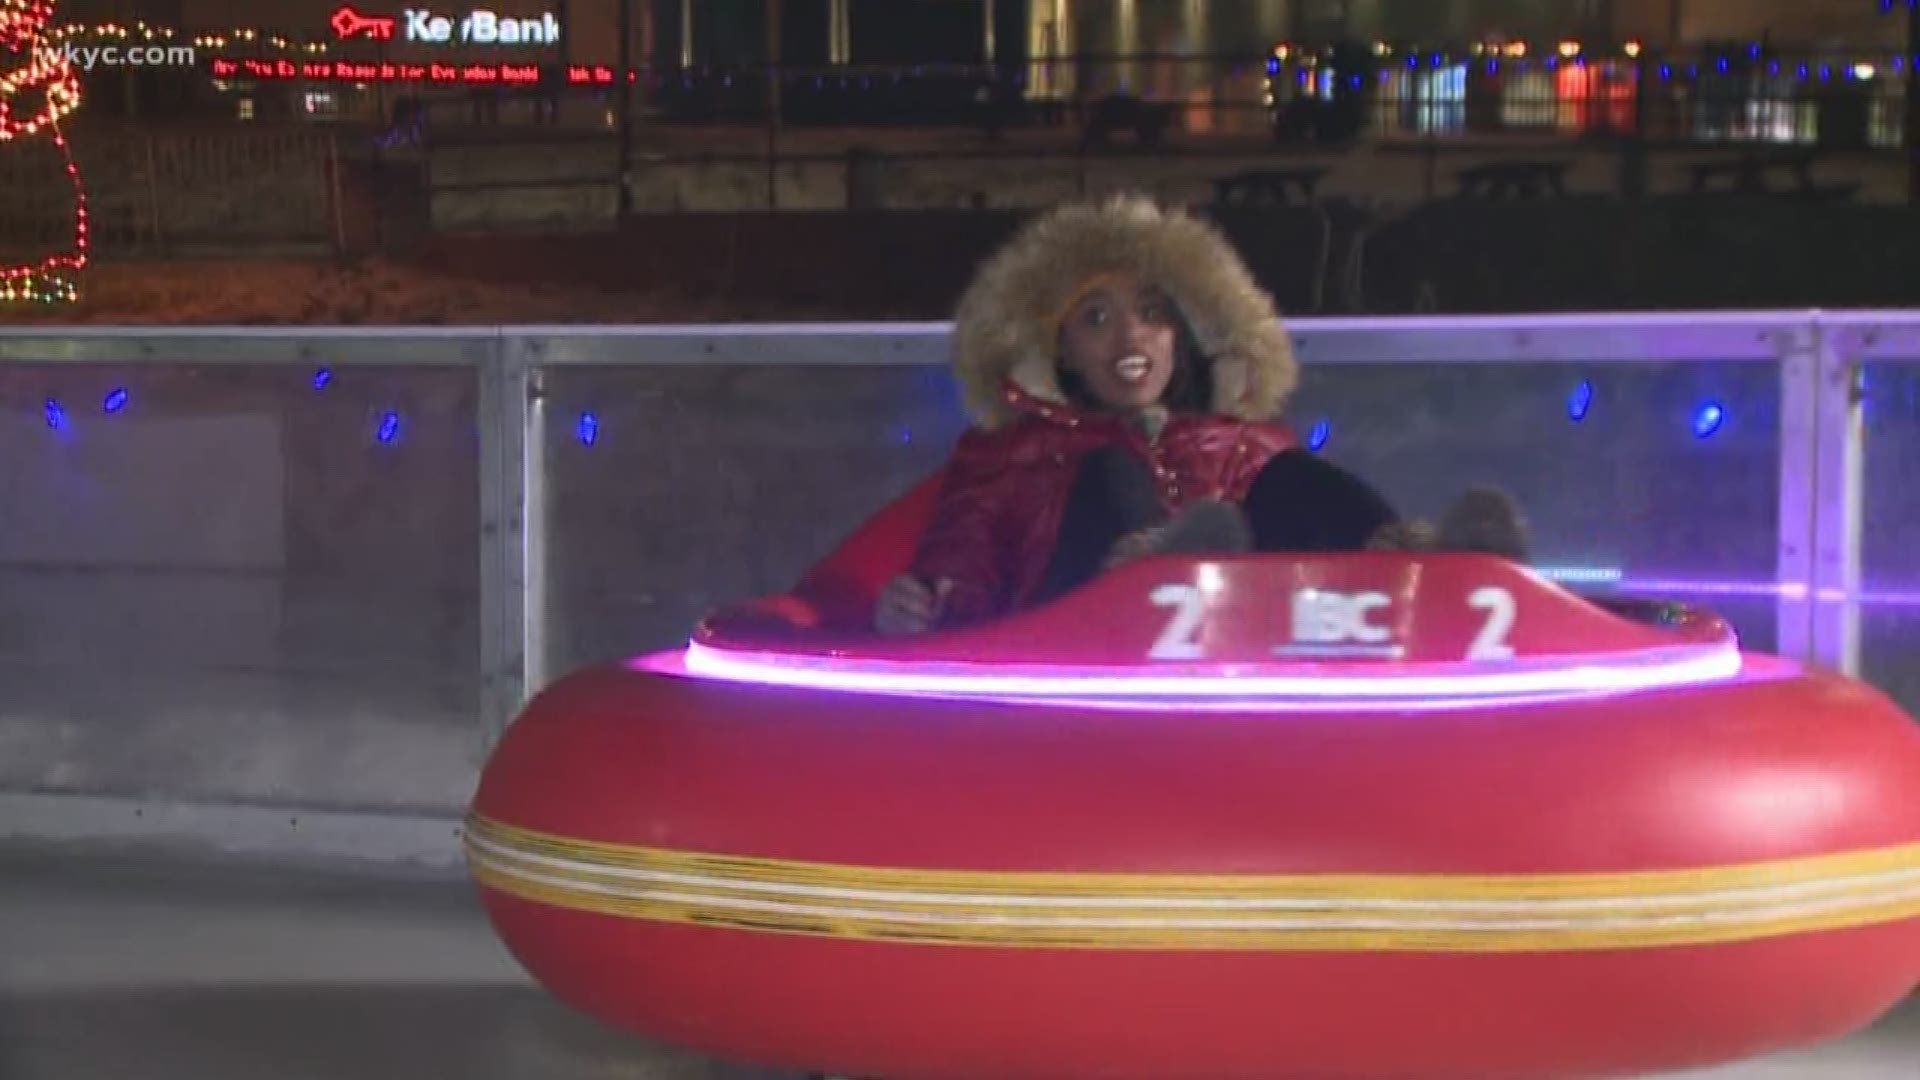 Dec. 12, 2018: WKYC's Jasmine Monroe takes us for a dizzying ride on Akron's new ice bumper cars at Lock 3.